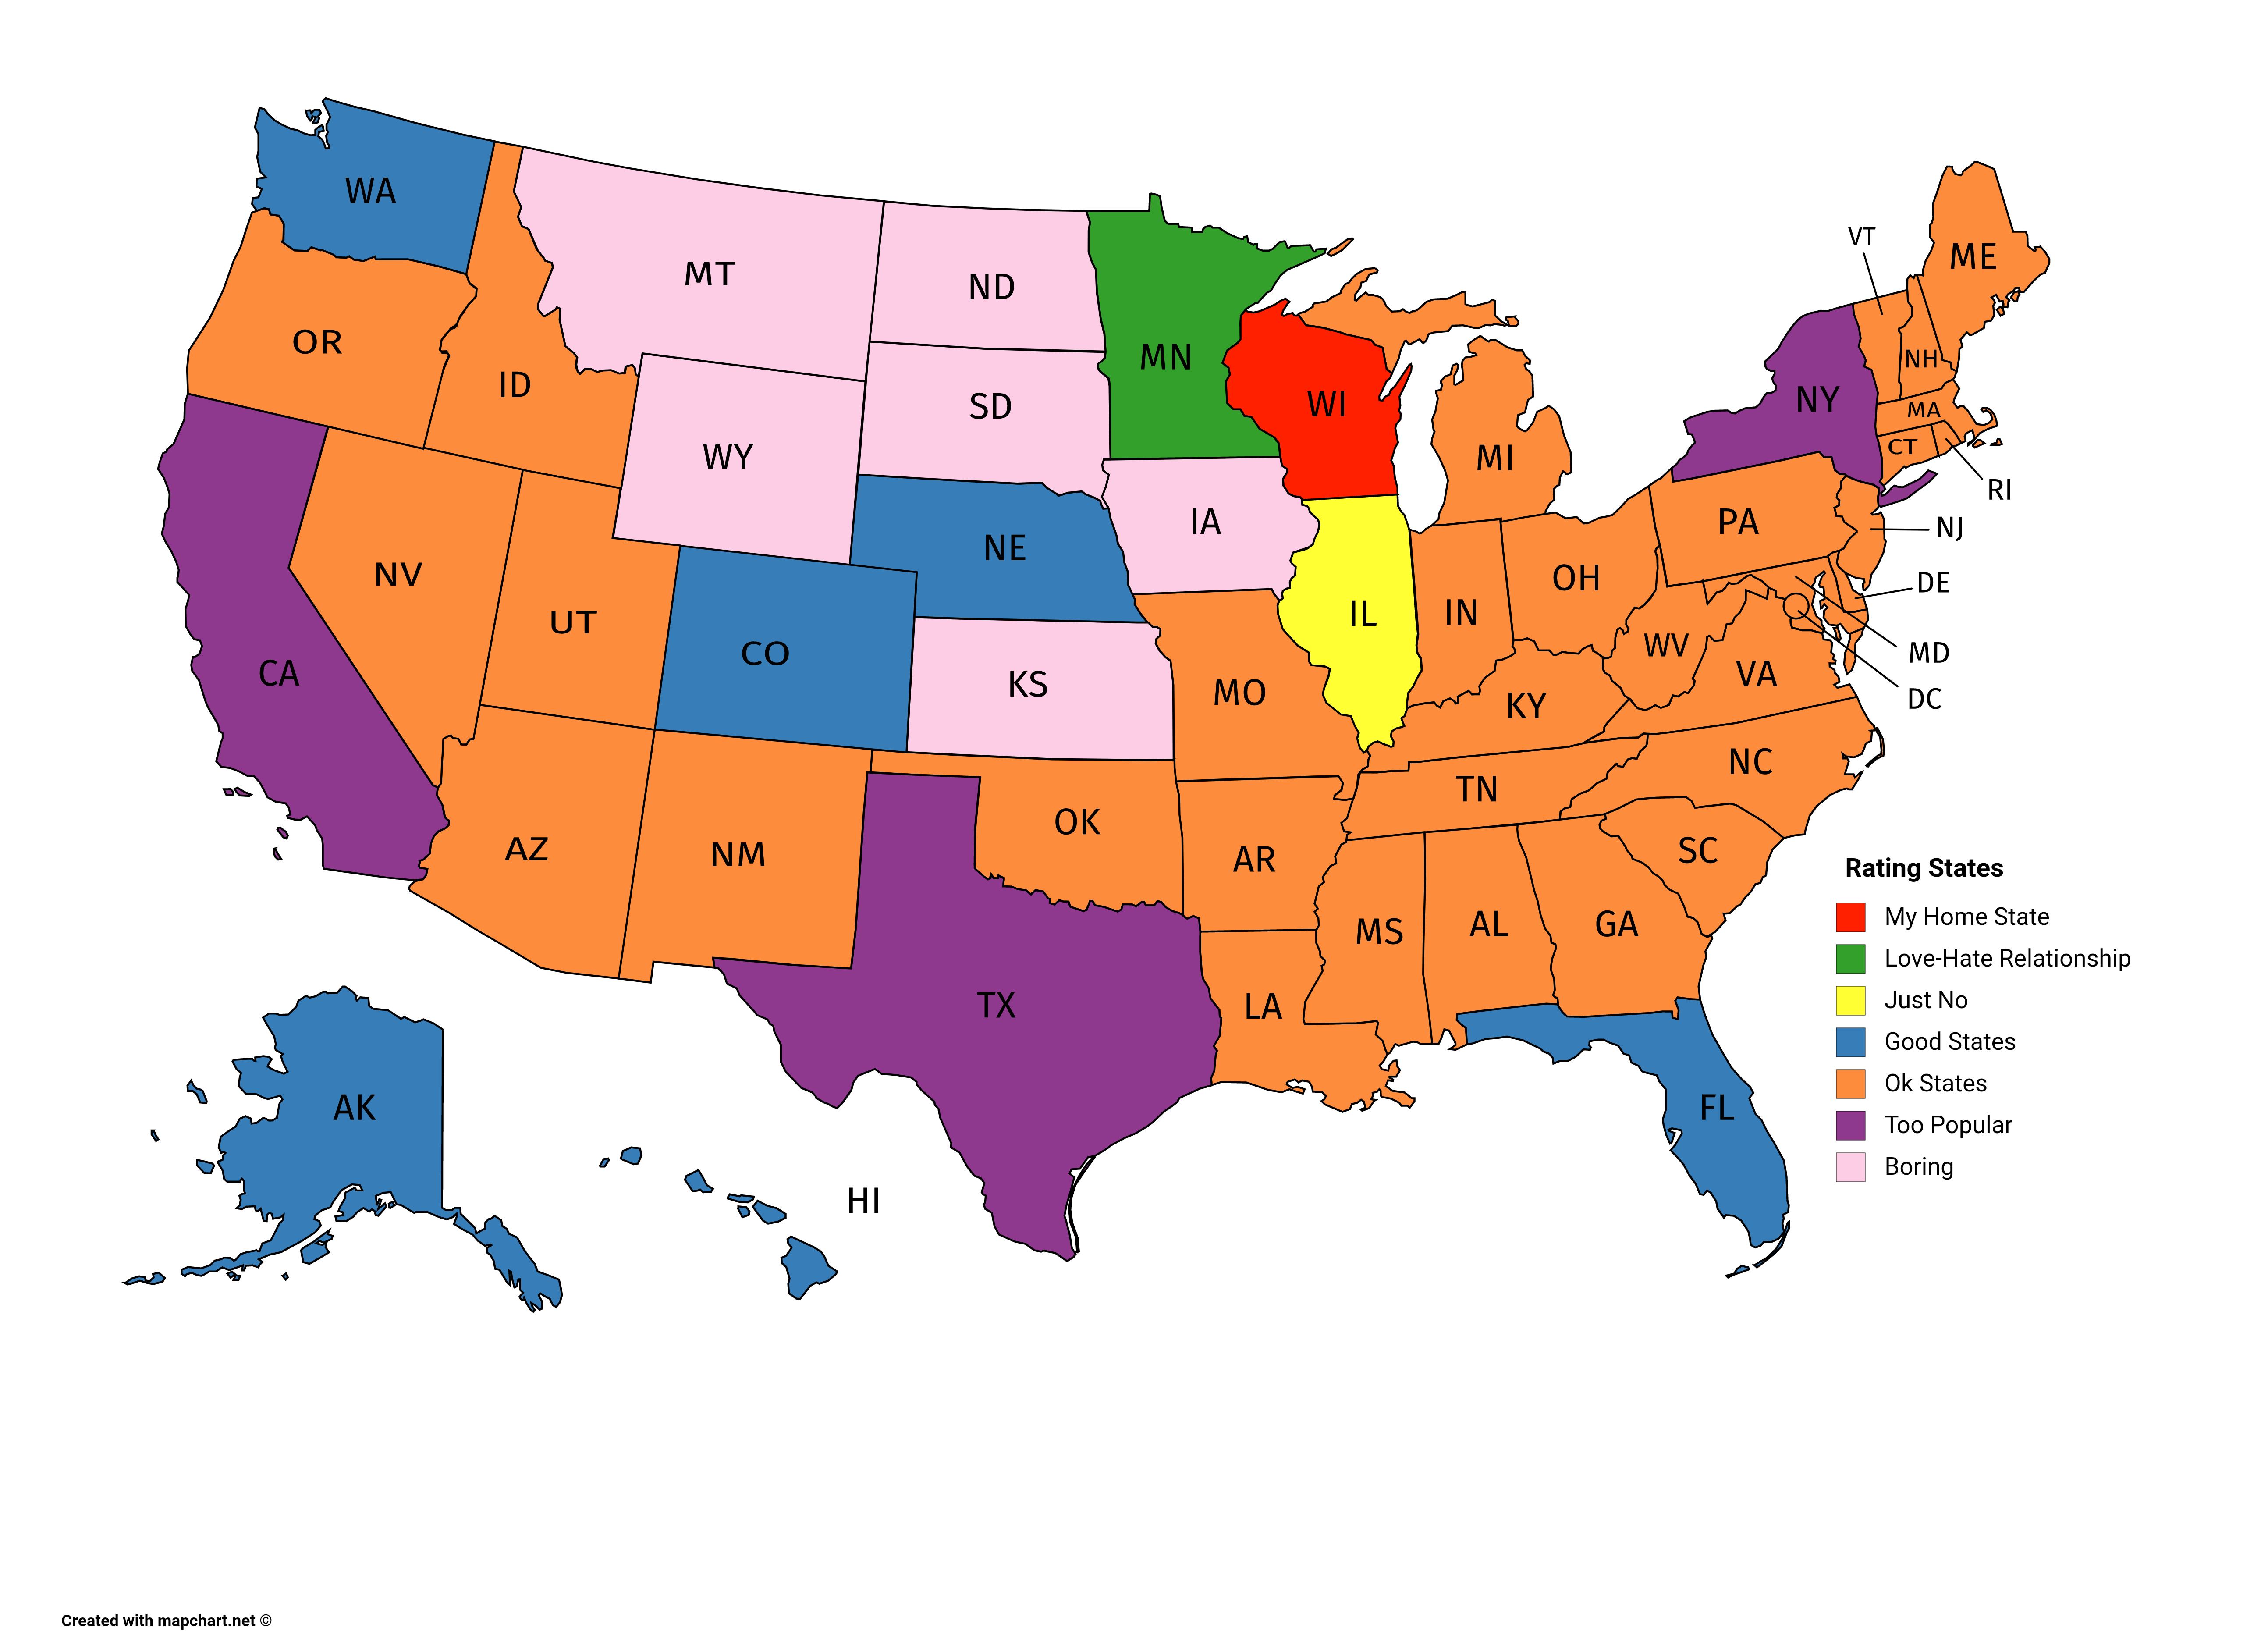 Map : A Wisconsin's view on the U.S. states - Infographic.tv - Number